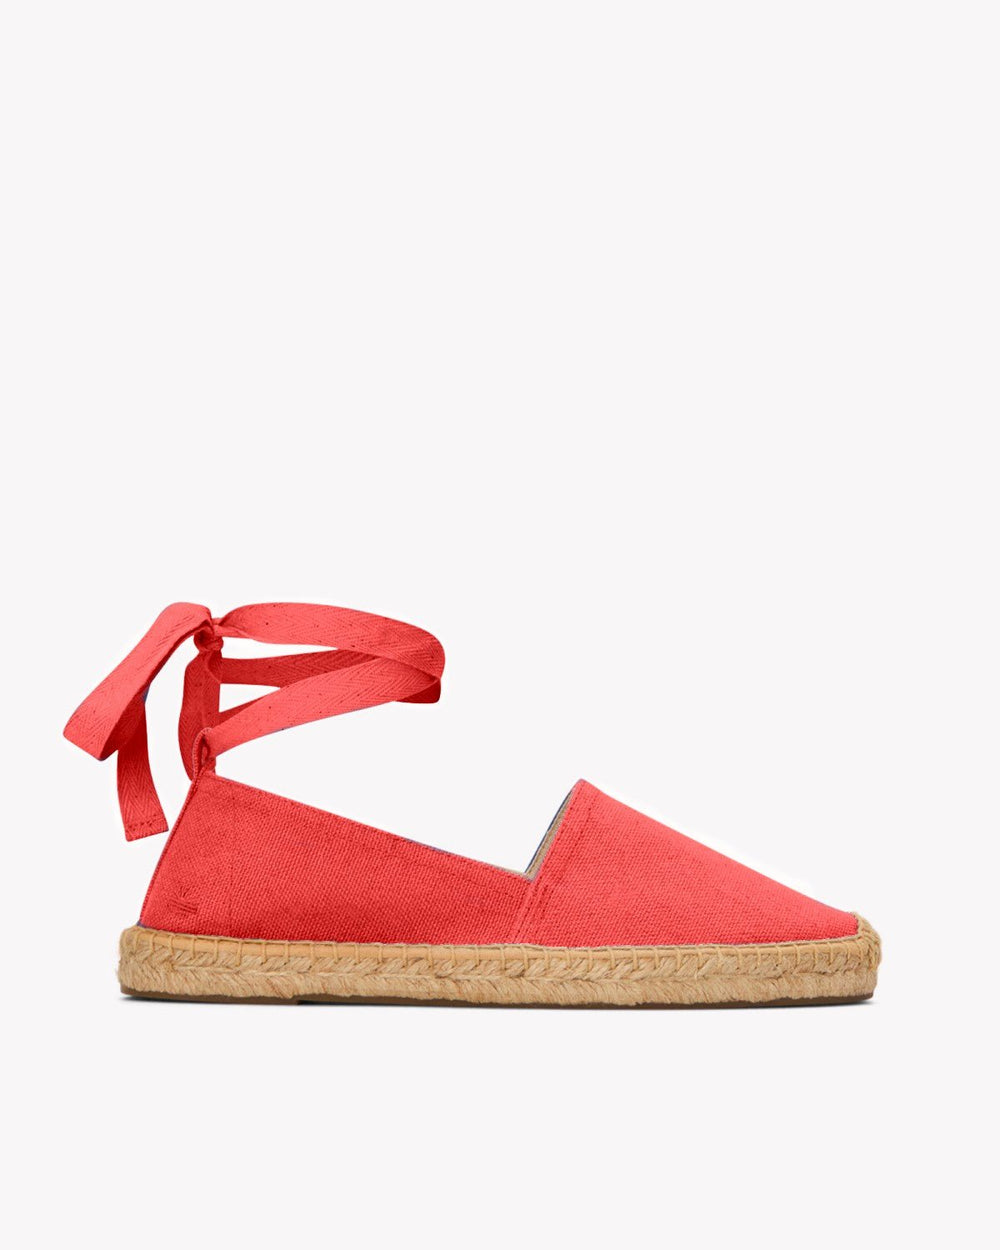 The Original Lace Up Espadrille - Cayenne Red - Women's - Women's Espadrilles - Cayenne Red - Soludos -